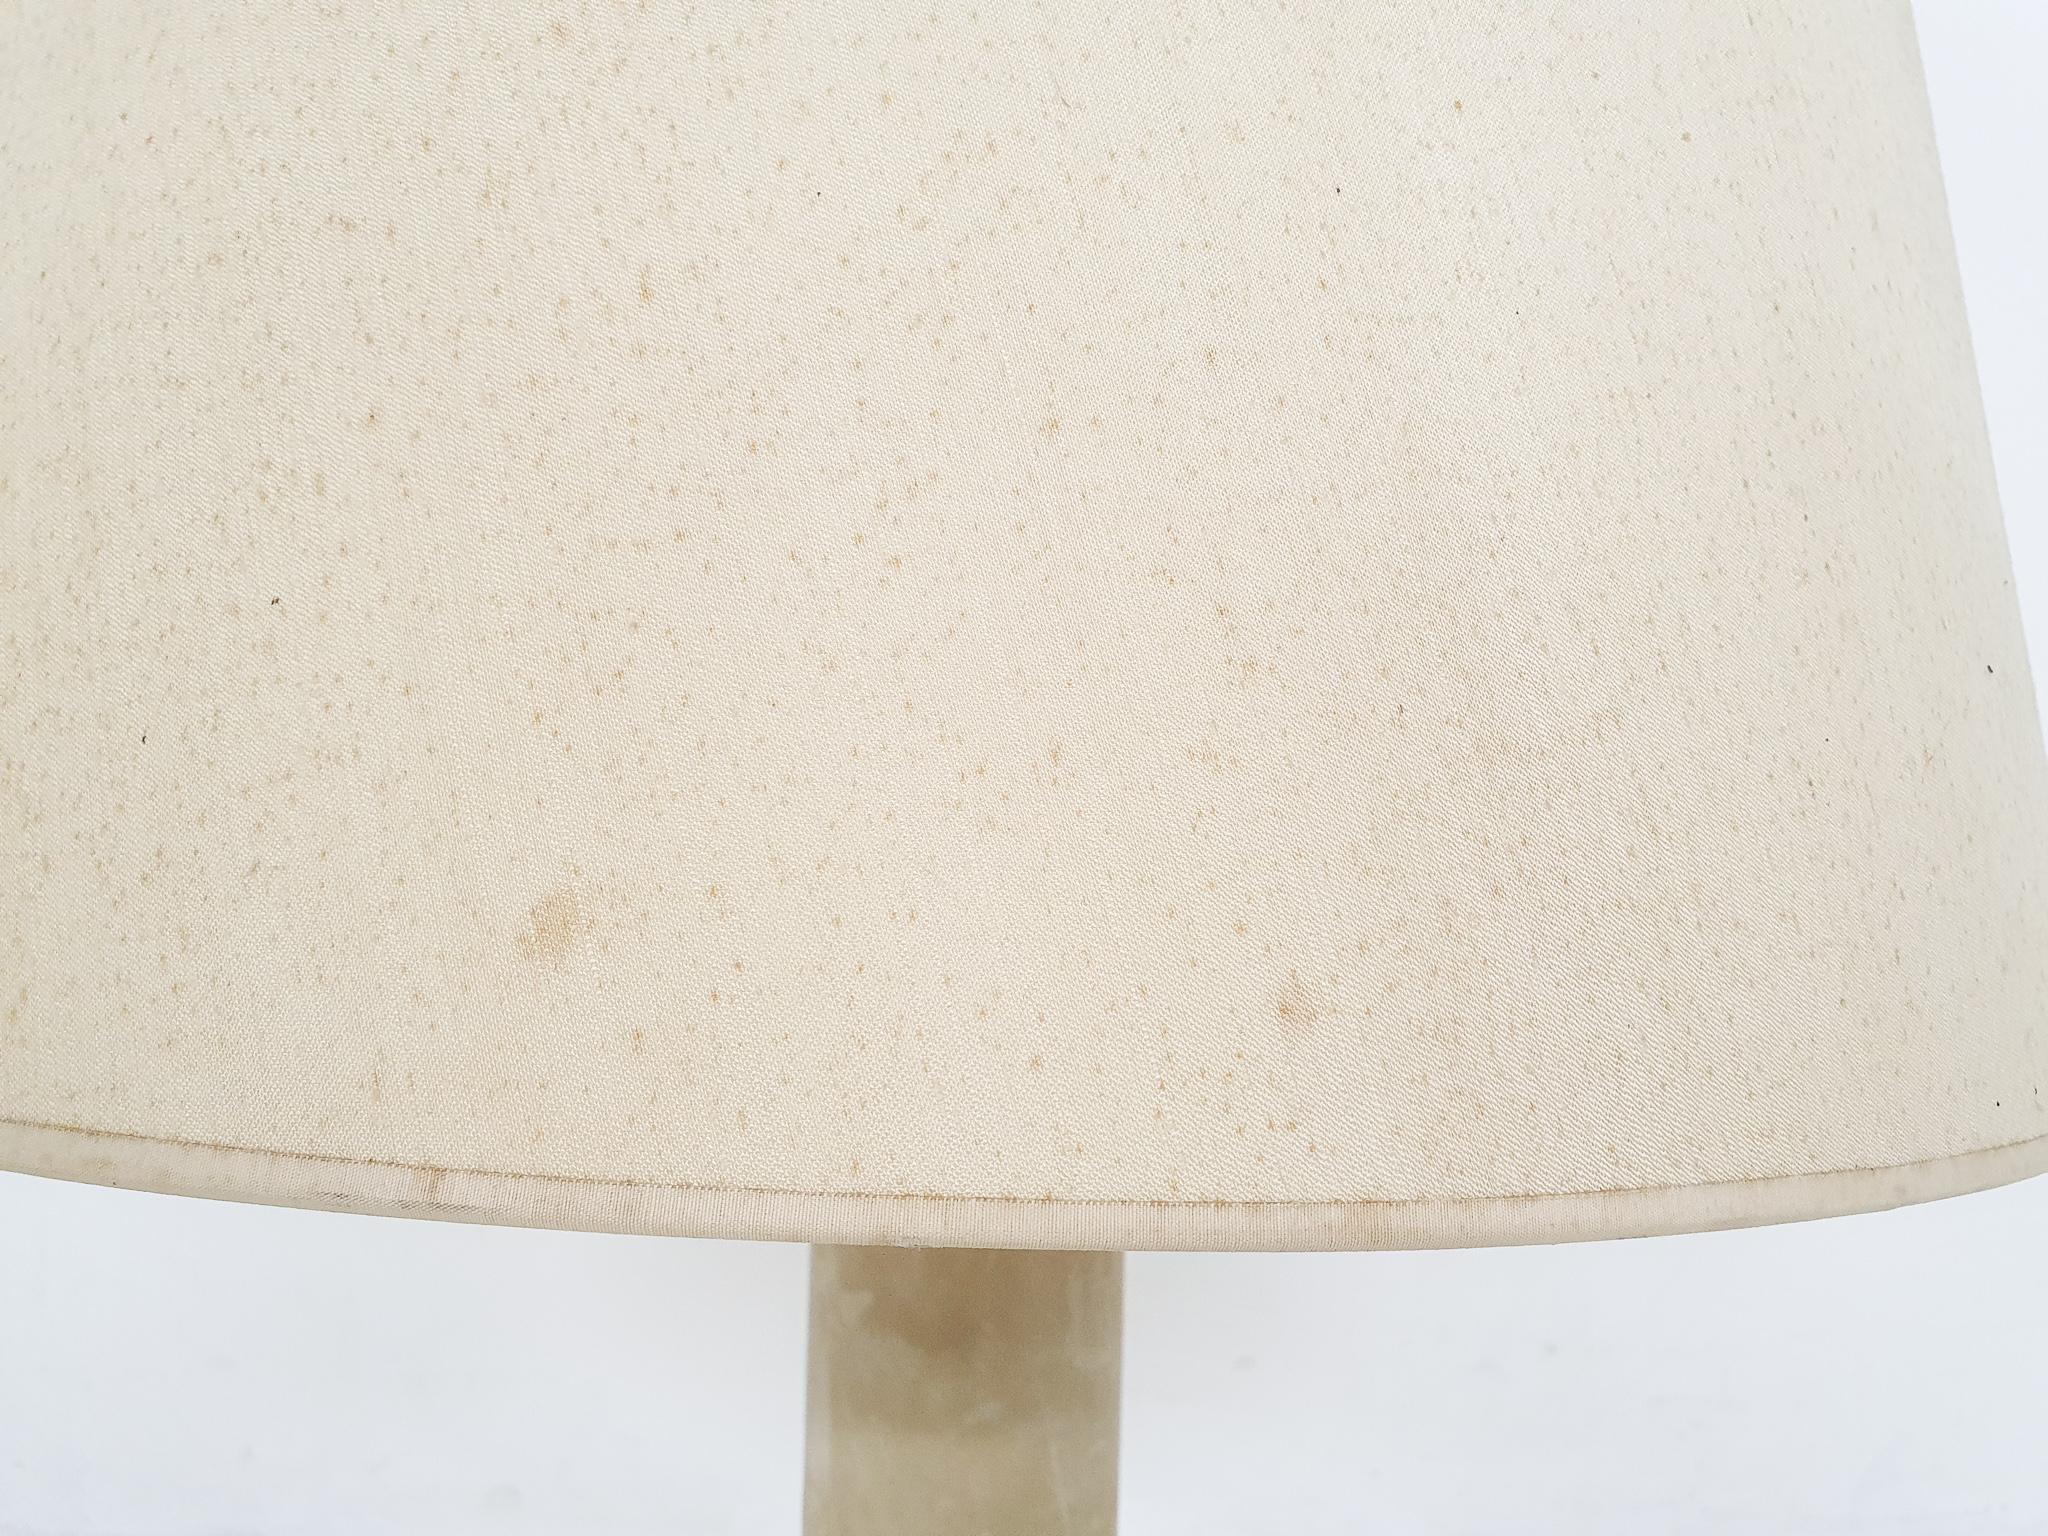 20th Century Beige Leather and Brass Table Lamp, Attrbuted Jaques Adnet, France, 1960s